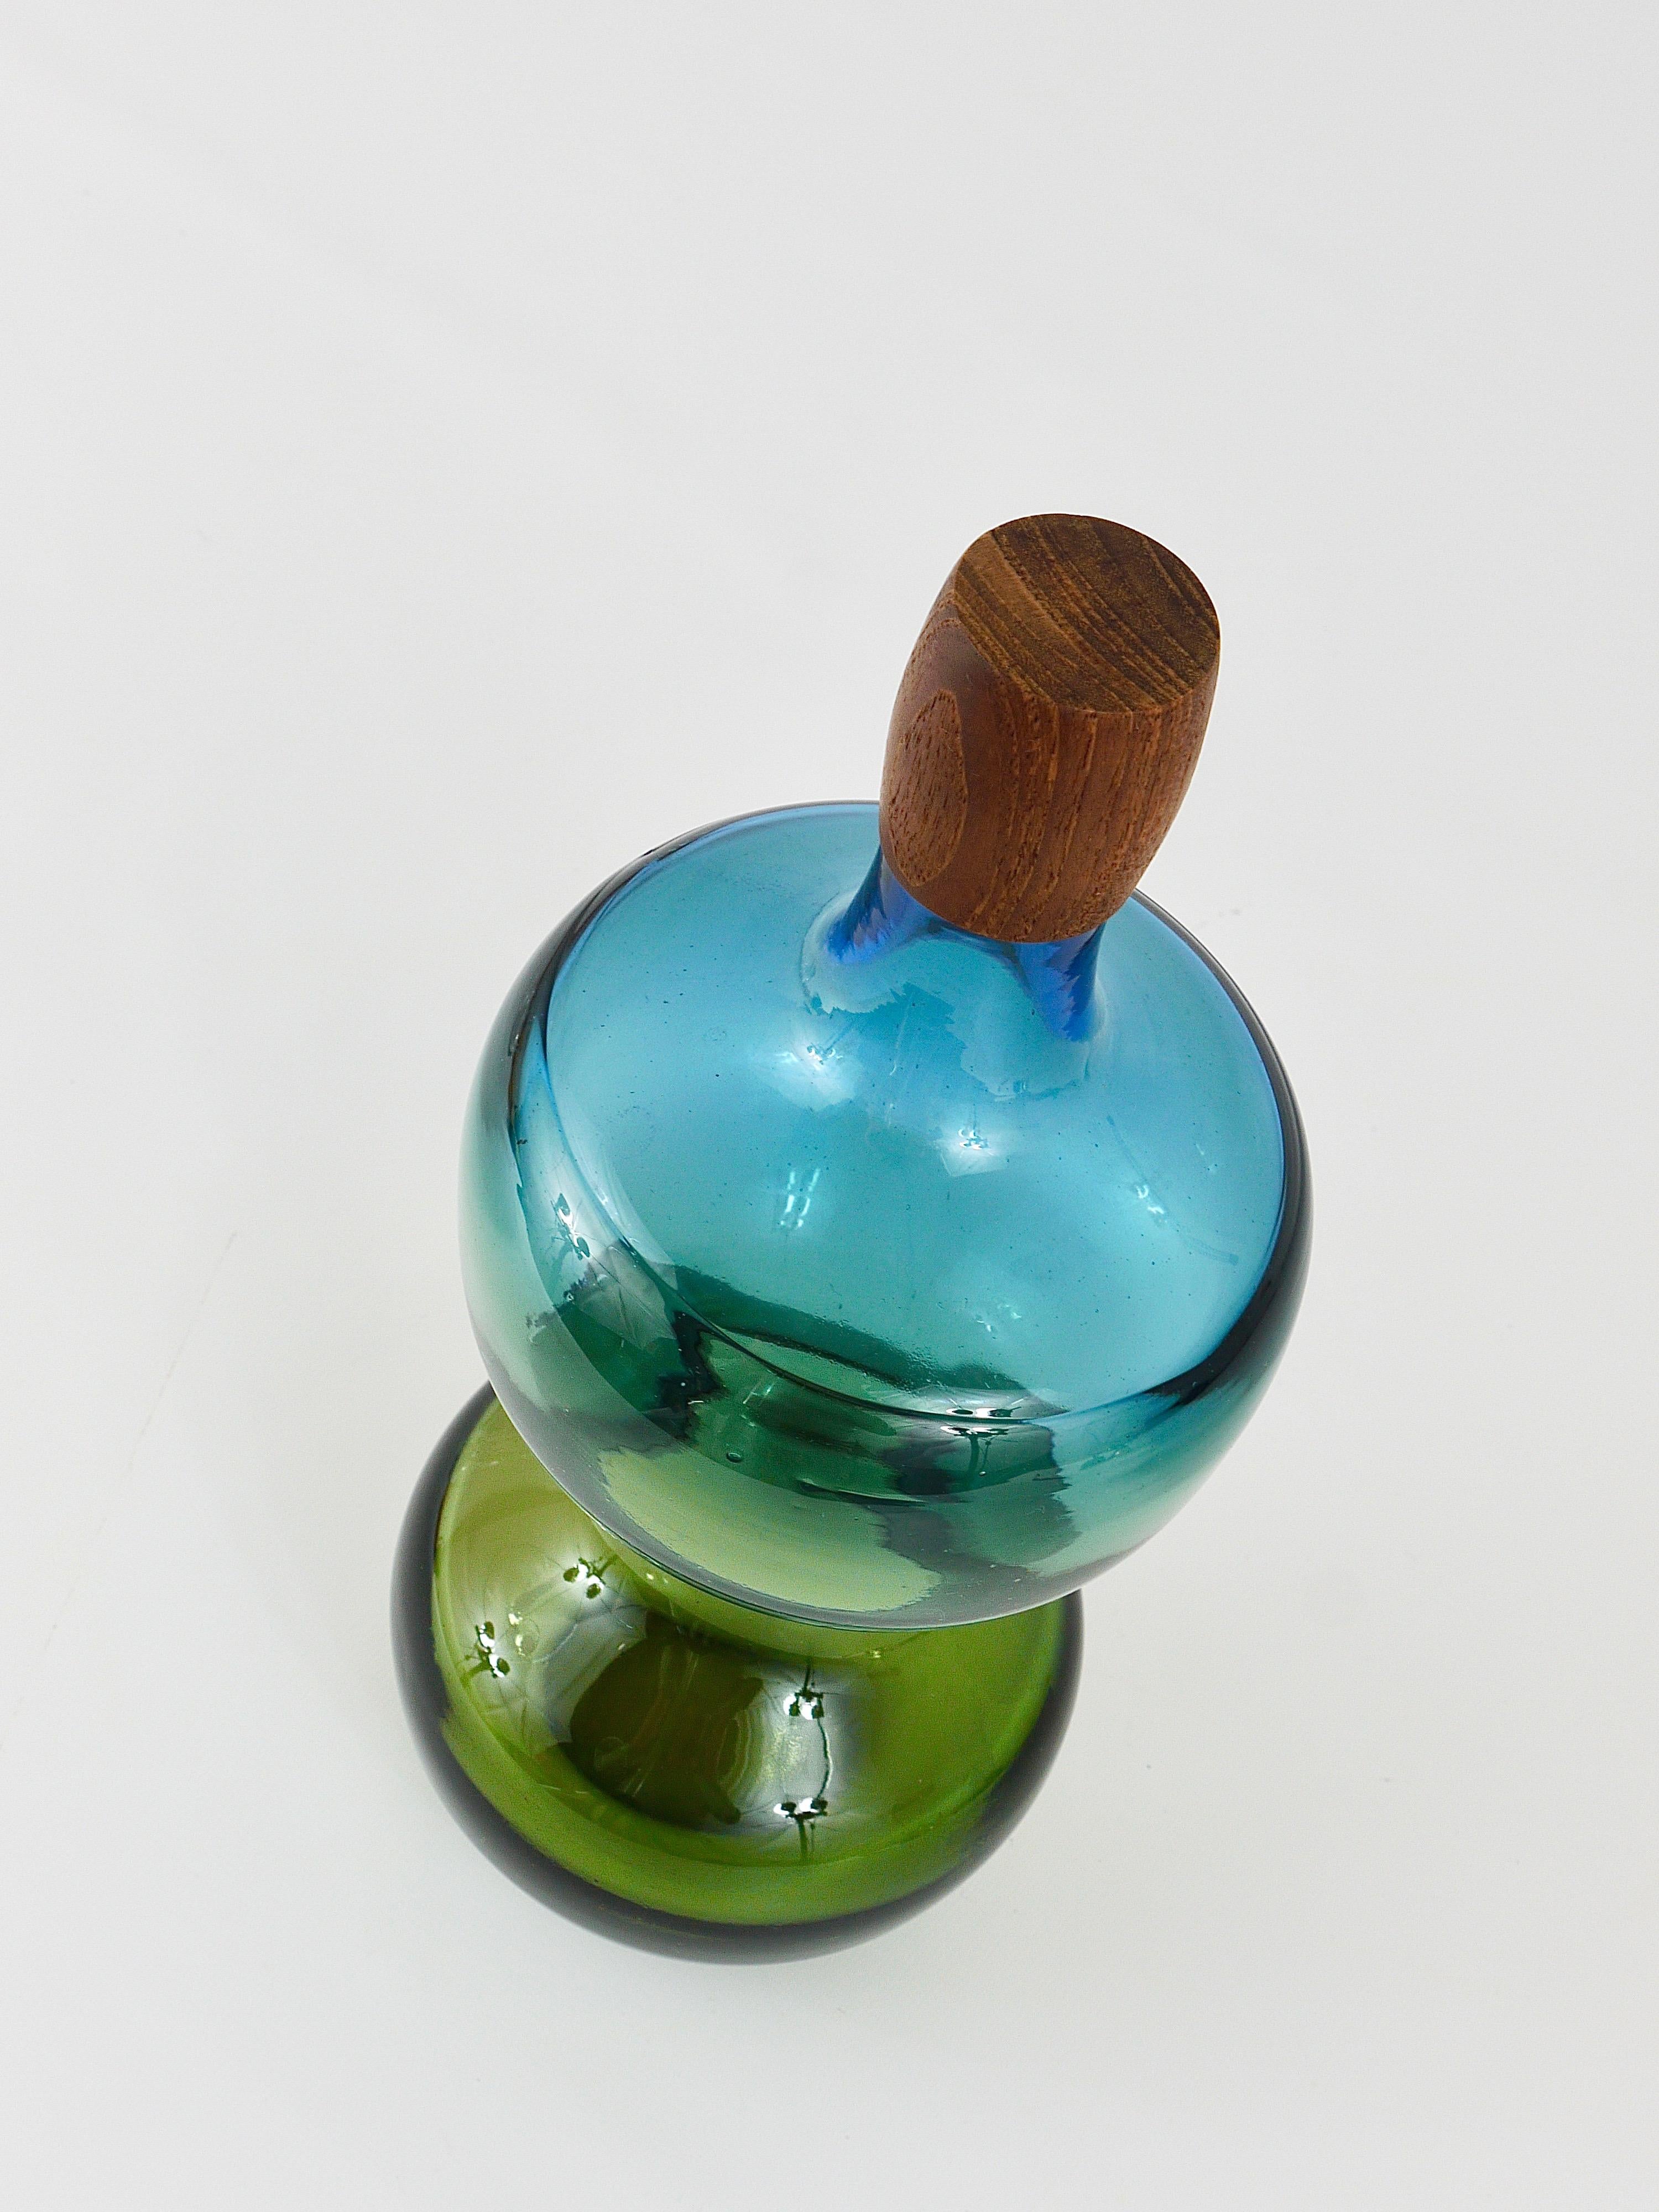 A beautiful and colorful carafe 